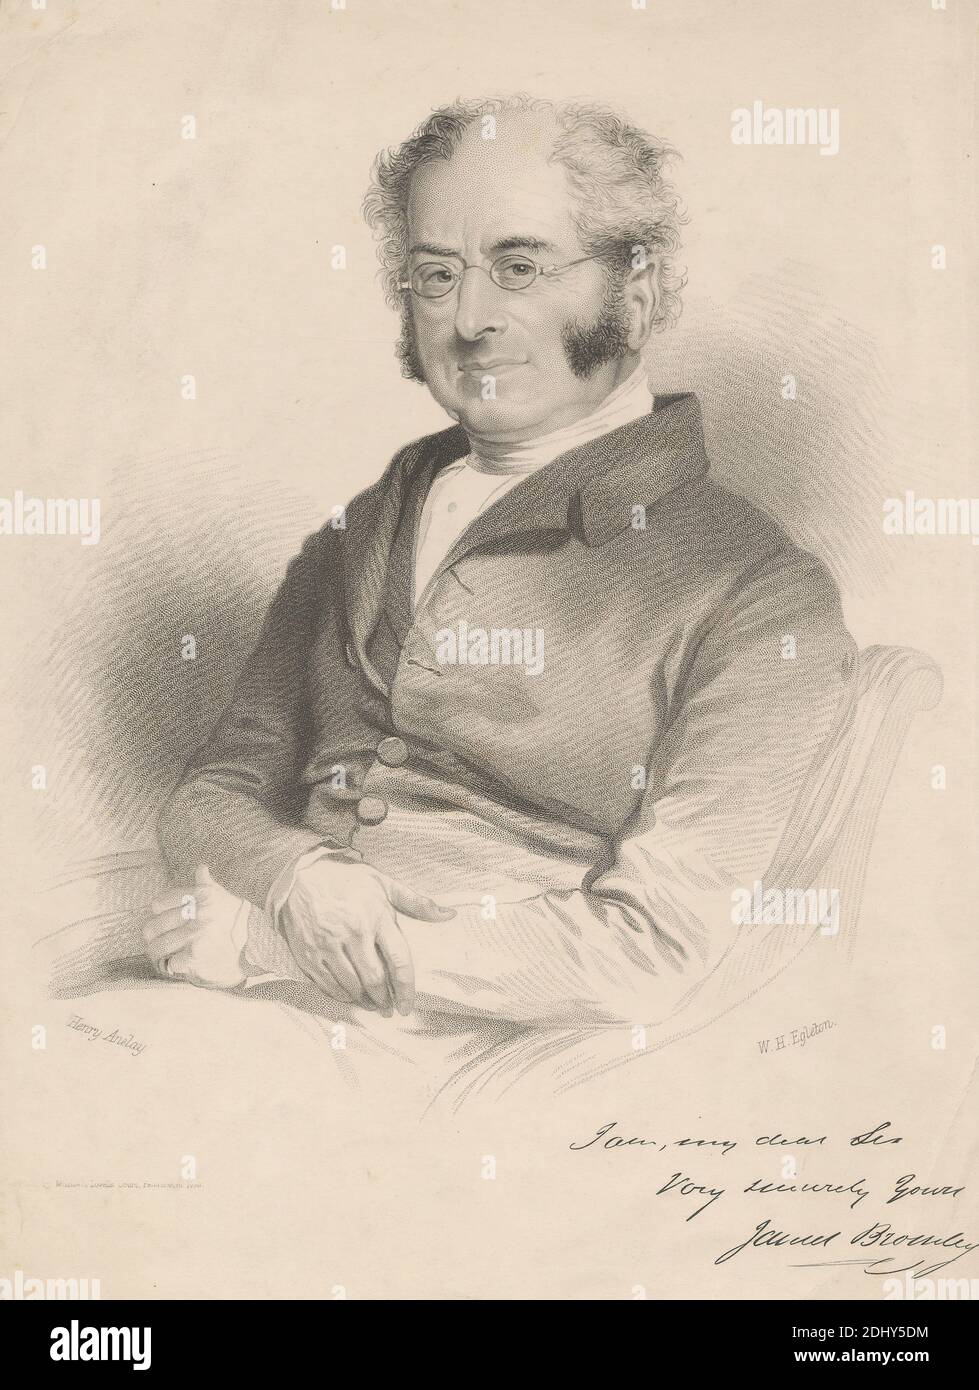 James Bromley, William H. Egleton, active 1833–1862, after Henry Anelay, active 1858–1873, British, Printed by John Mitchell, active 1832–died 1889, British, undated, Lithograph on moderately thick, smooth, beige wove paper, Sheet: 9 7/8 x 7 7/16 inches (25.1 x 18.9 cm) and Image: 7 13/16 x 7 3/16 inches (19.8 x 18.2 cm), artist, chair, coat, eyeglasses, man, portrait Stock Photo